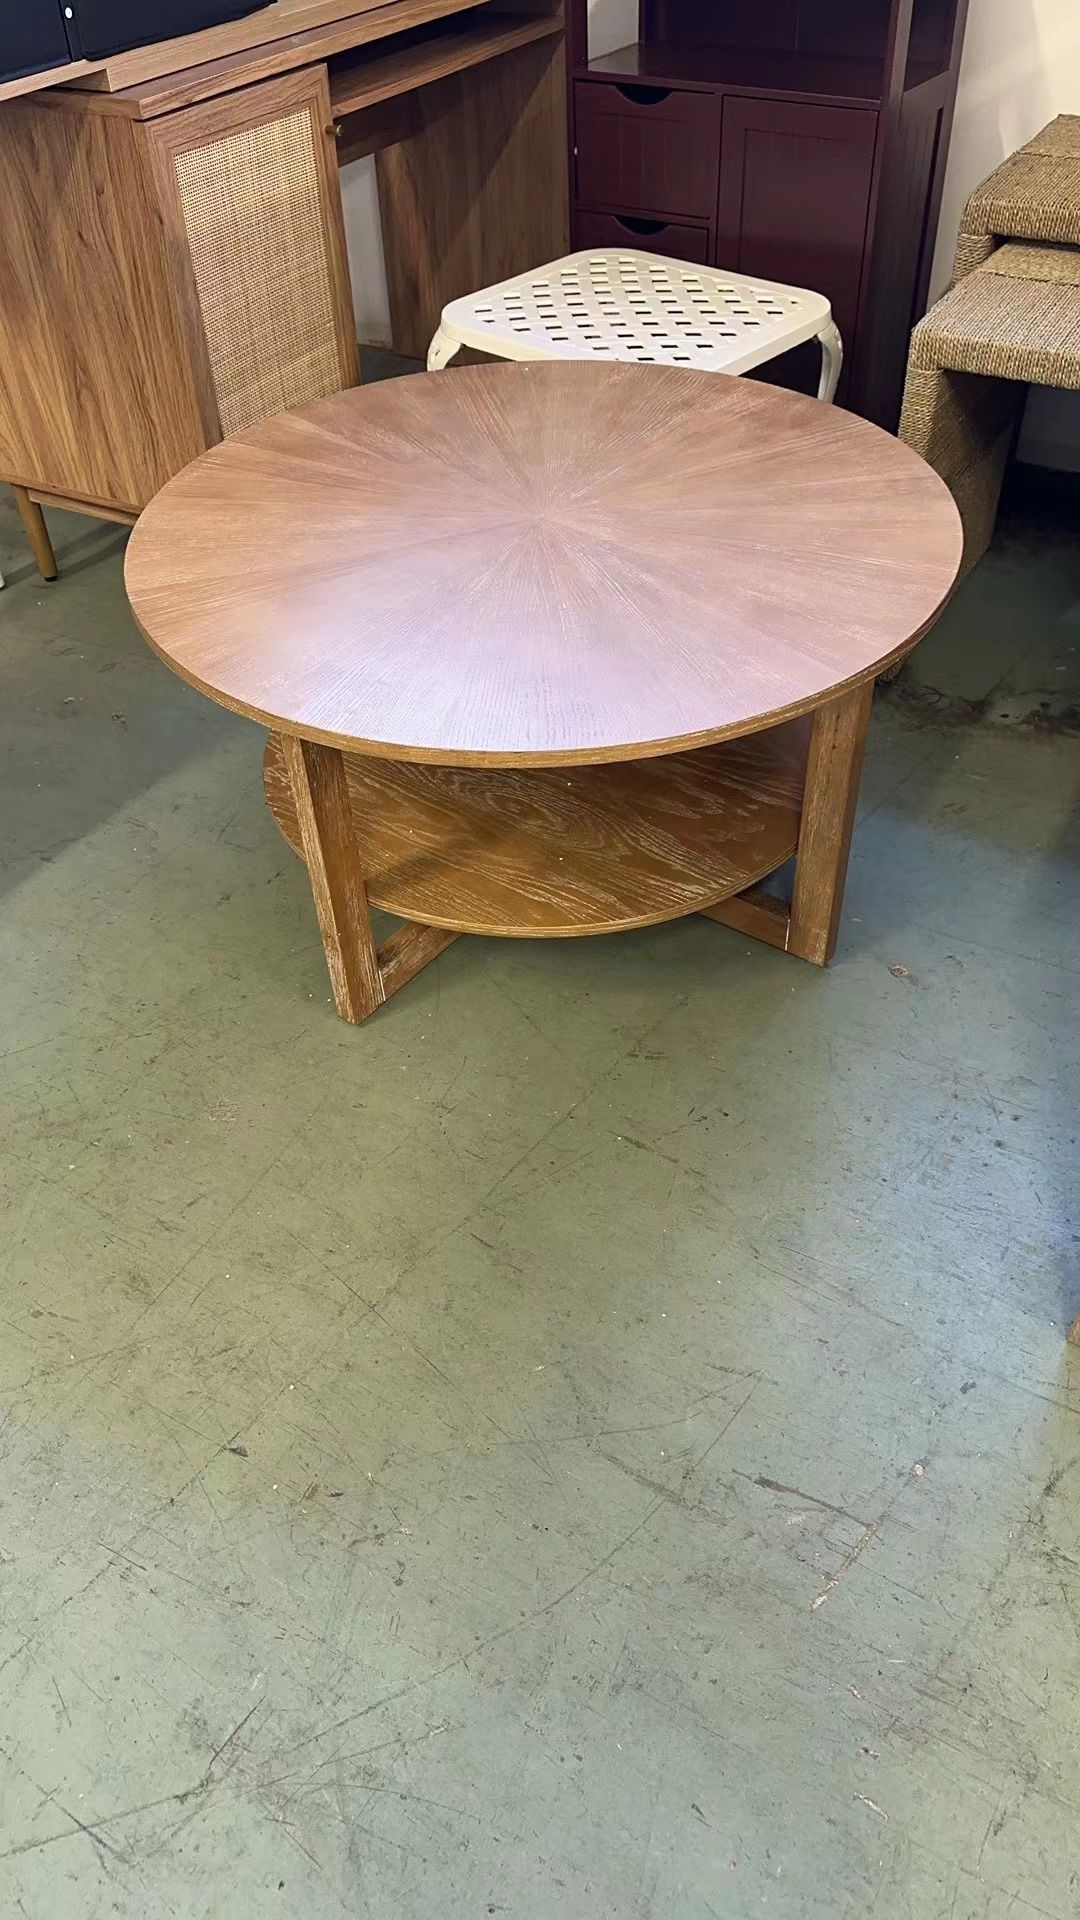 33.5” Round Coffee Table with Storage Shelf, Solid Wood Living Room Table with Umbrella Shaped Top, Farmhouse Center Cocktail Table for Office, Easy A